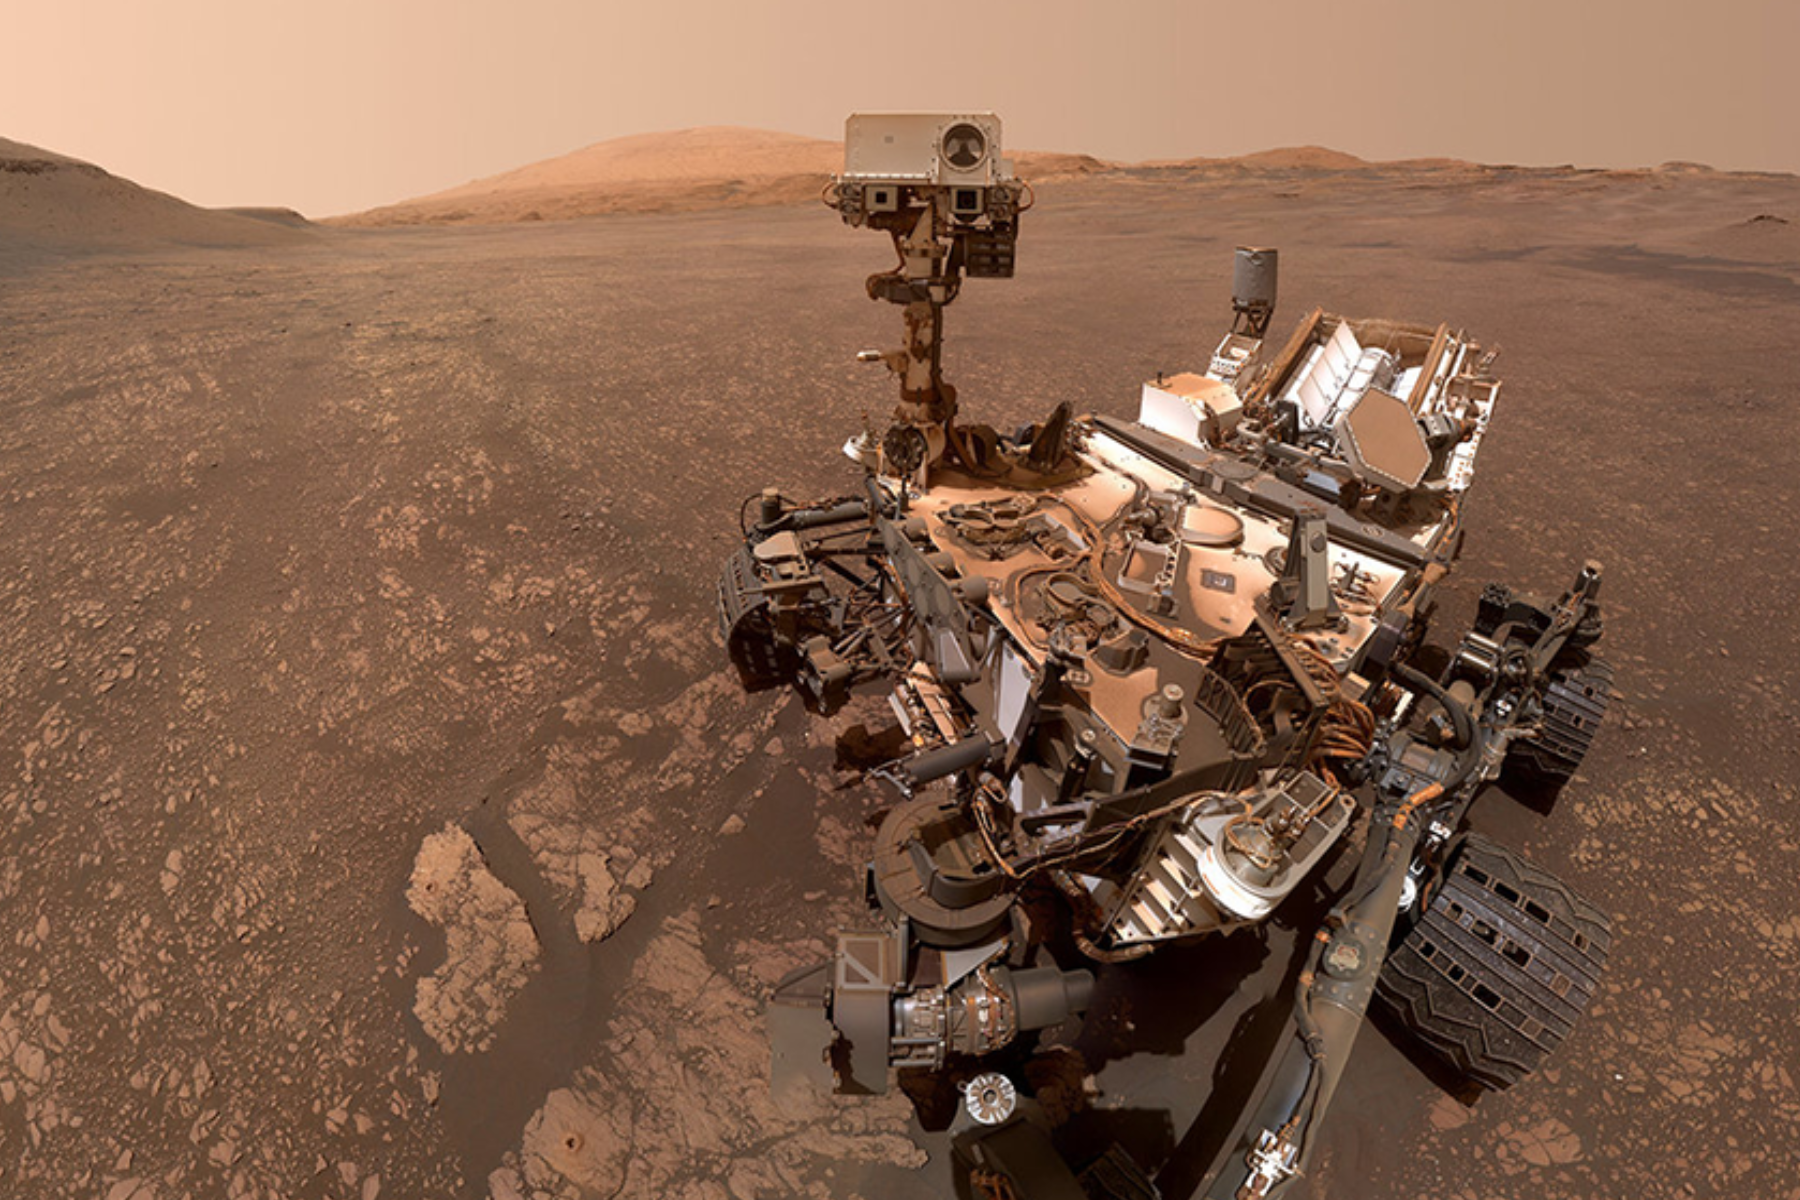 The Curiosity rover on planet Mars